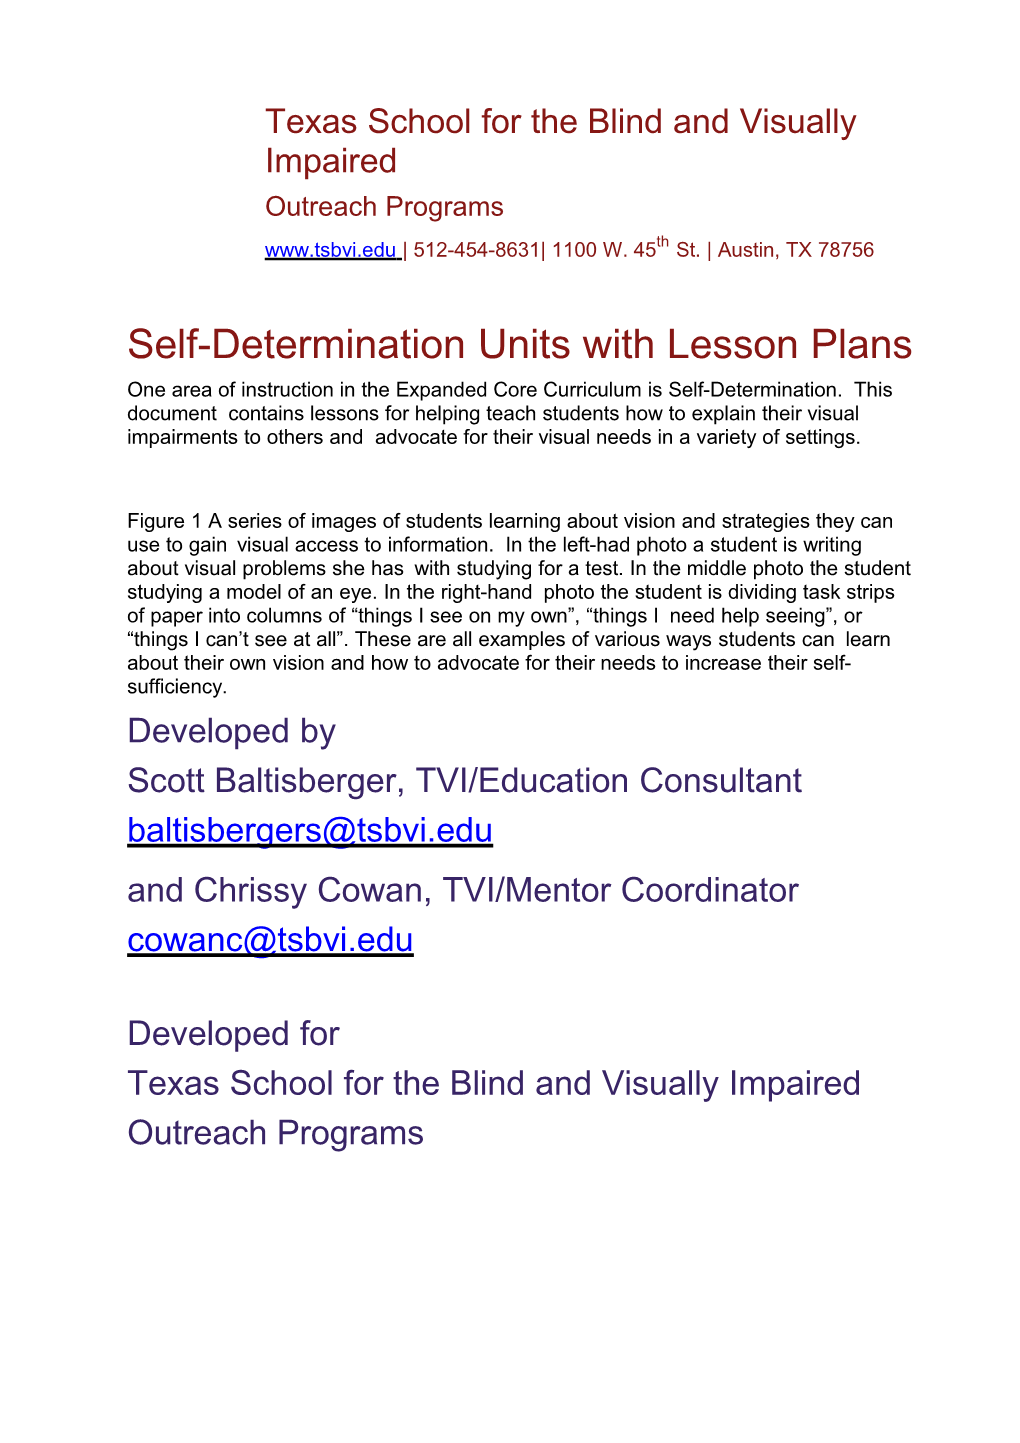 Self-Determination Units with Lesson Plans